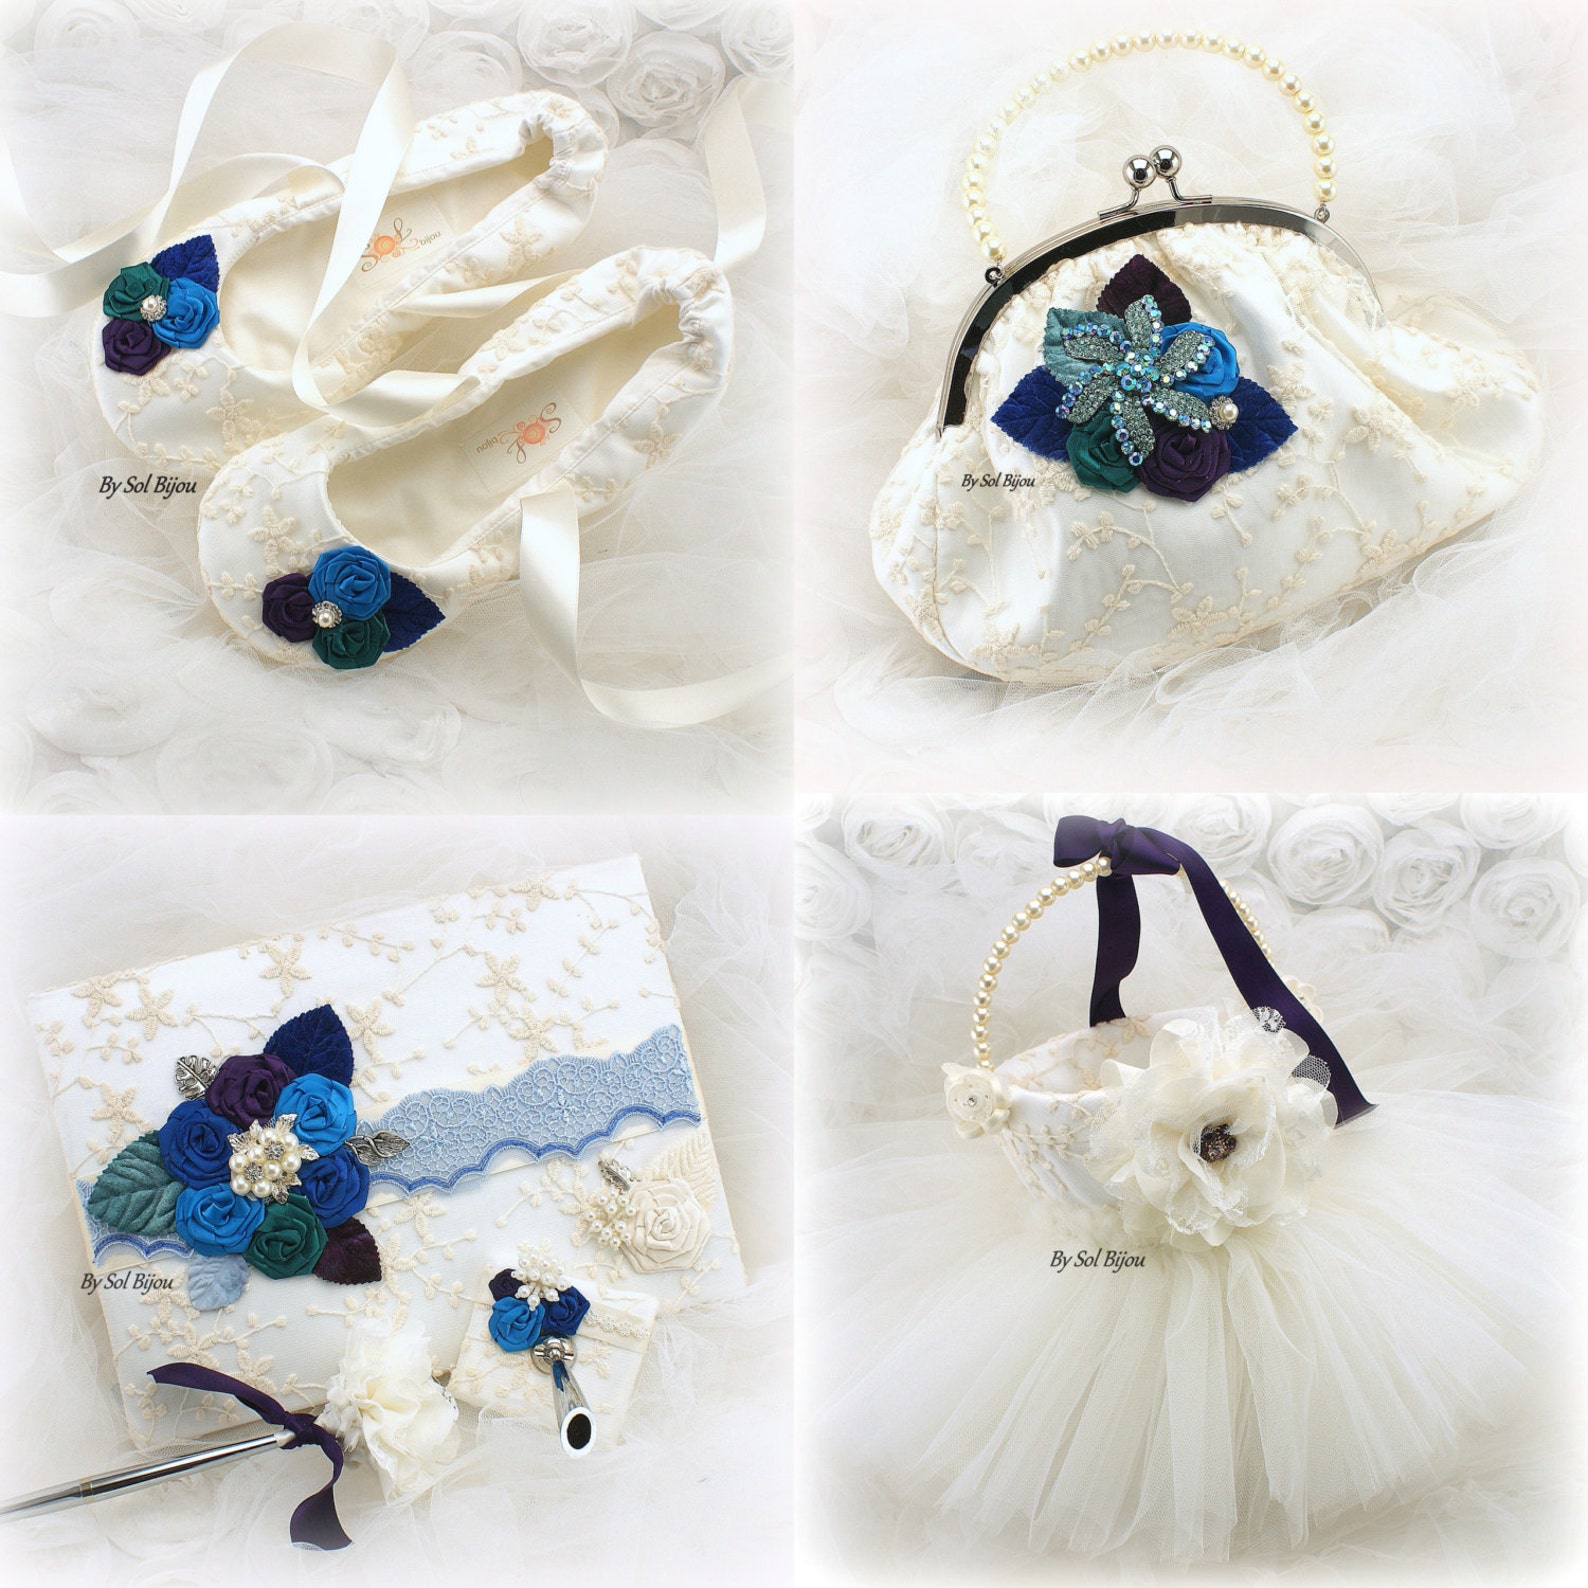 ballet flats,ivory, purple,blue, royal blue,turquoise,bridal,beach wedding,shoes,flats,ballerina slippers,flower girl, crystals,